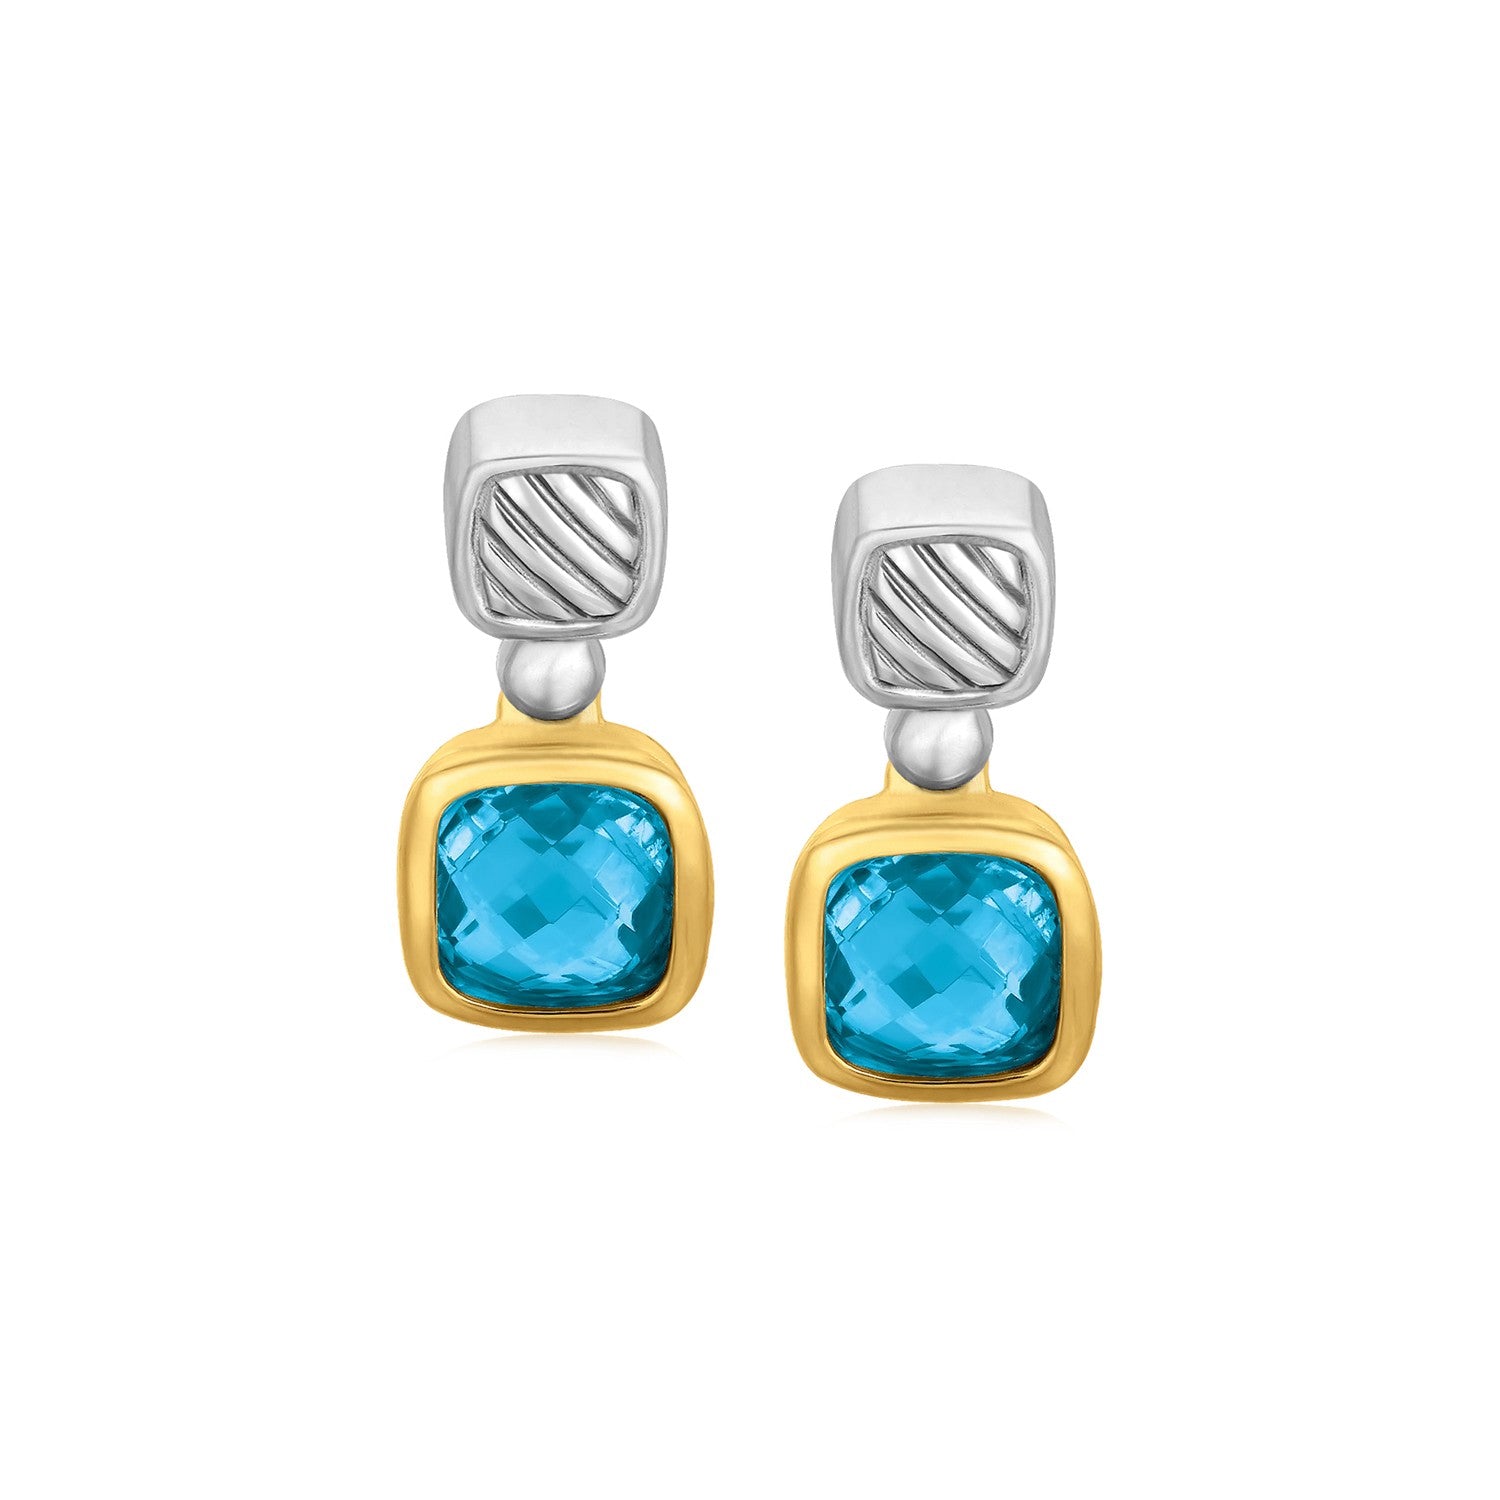 18k Yellow Gold and Sterling Silver Drop Earrings with Bezel Set Blue Topaz